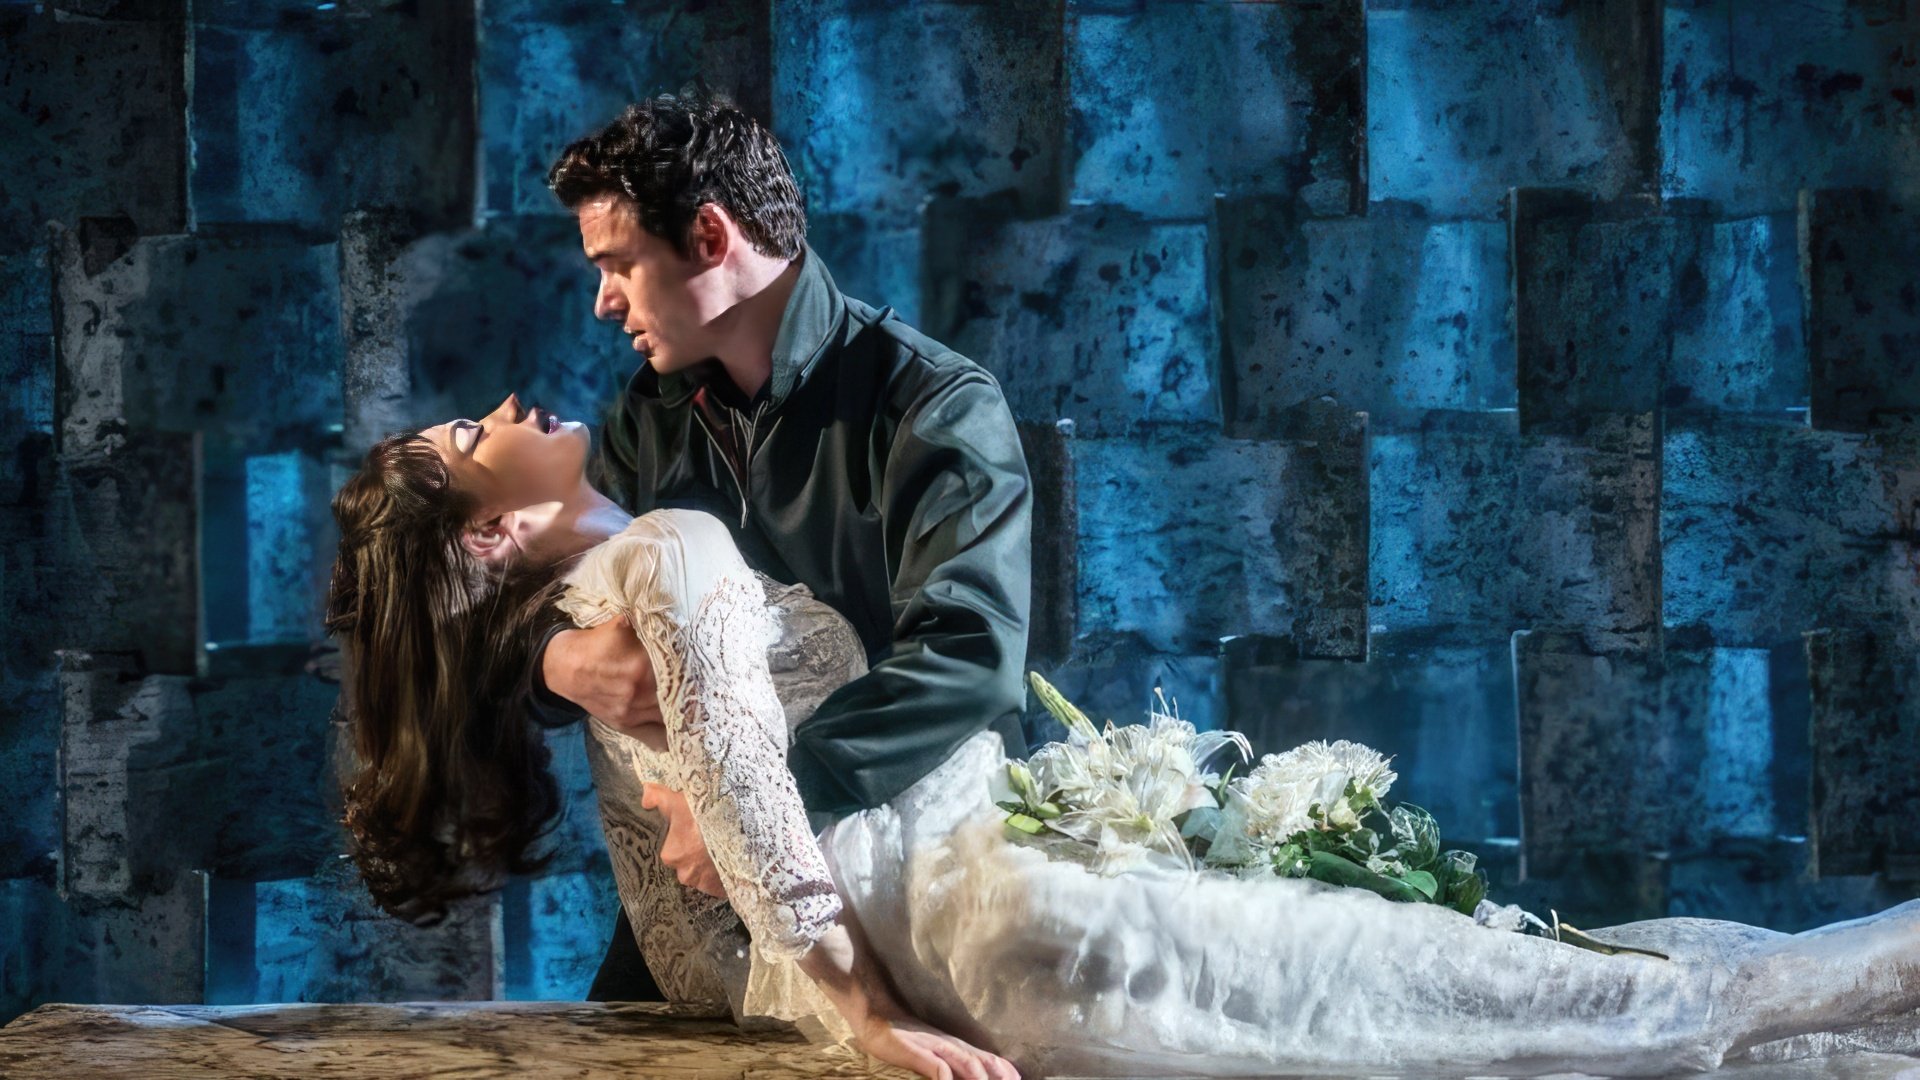 Lily James and Richard Madden are new Romeo and Juliet